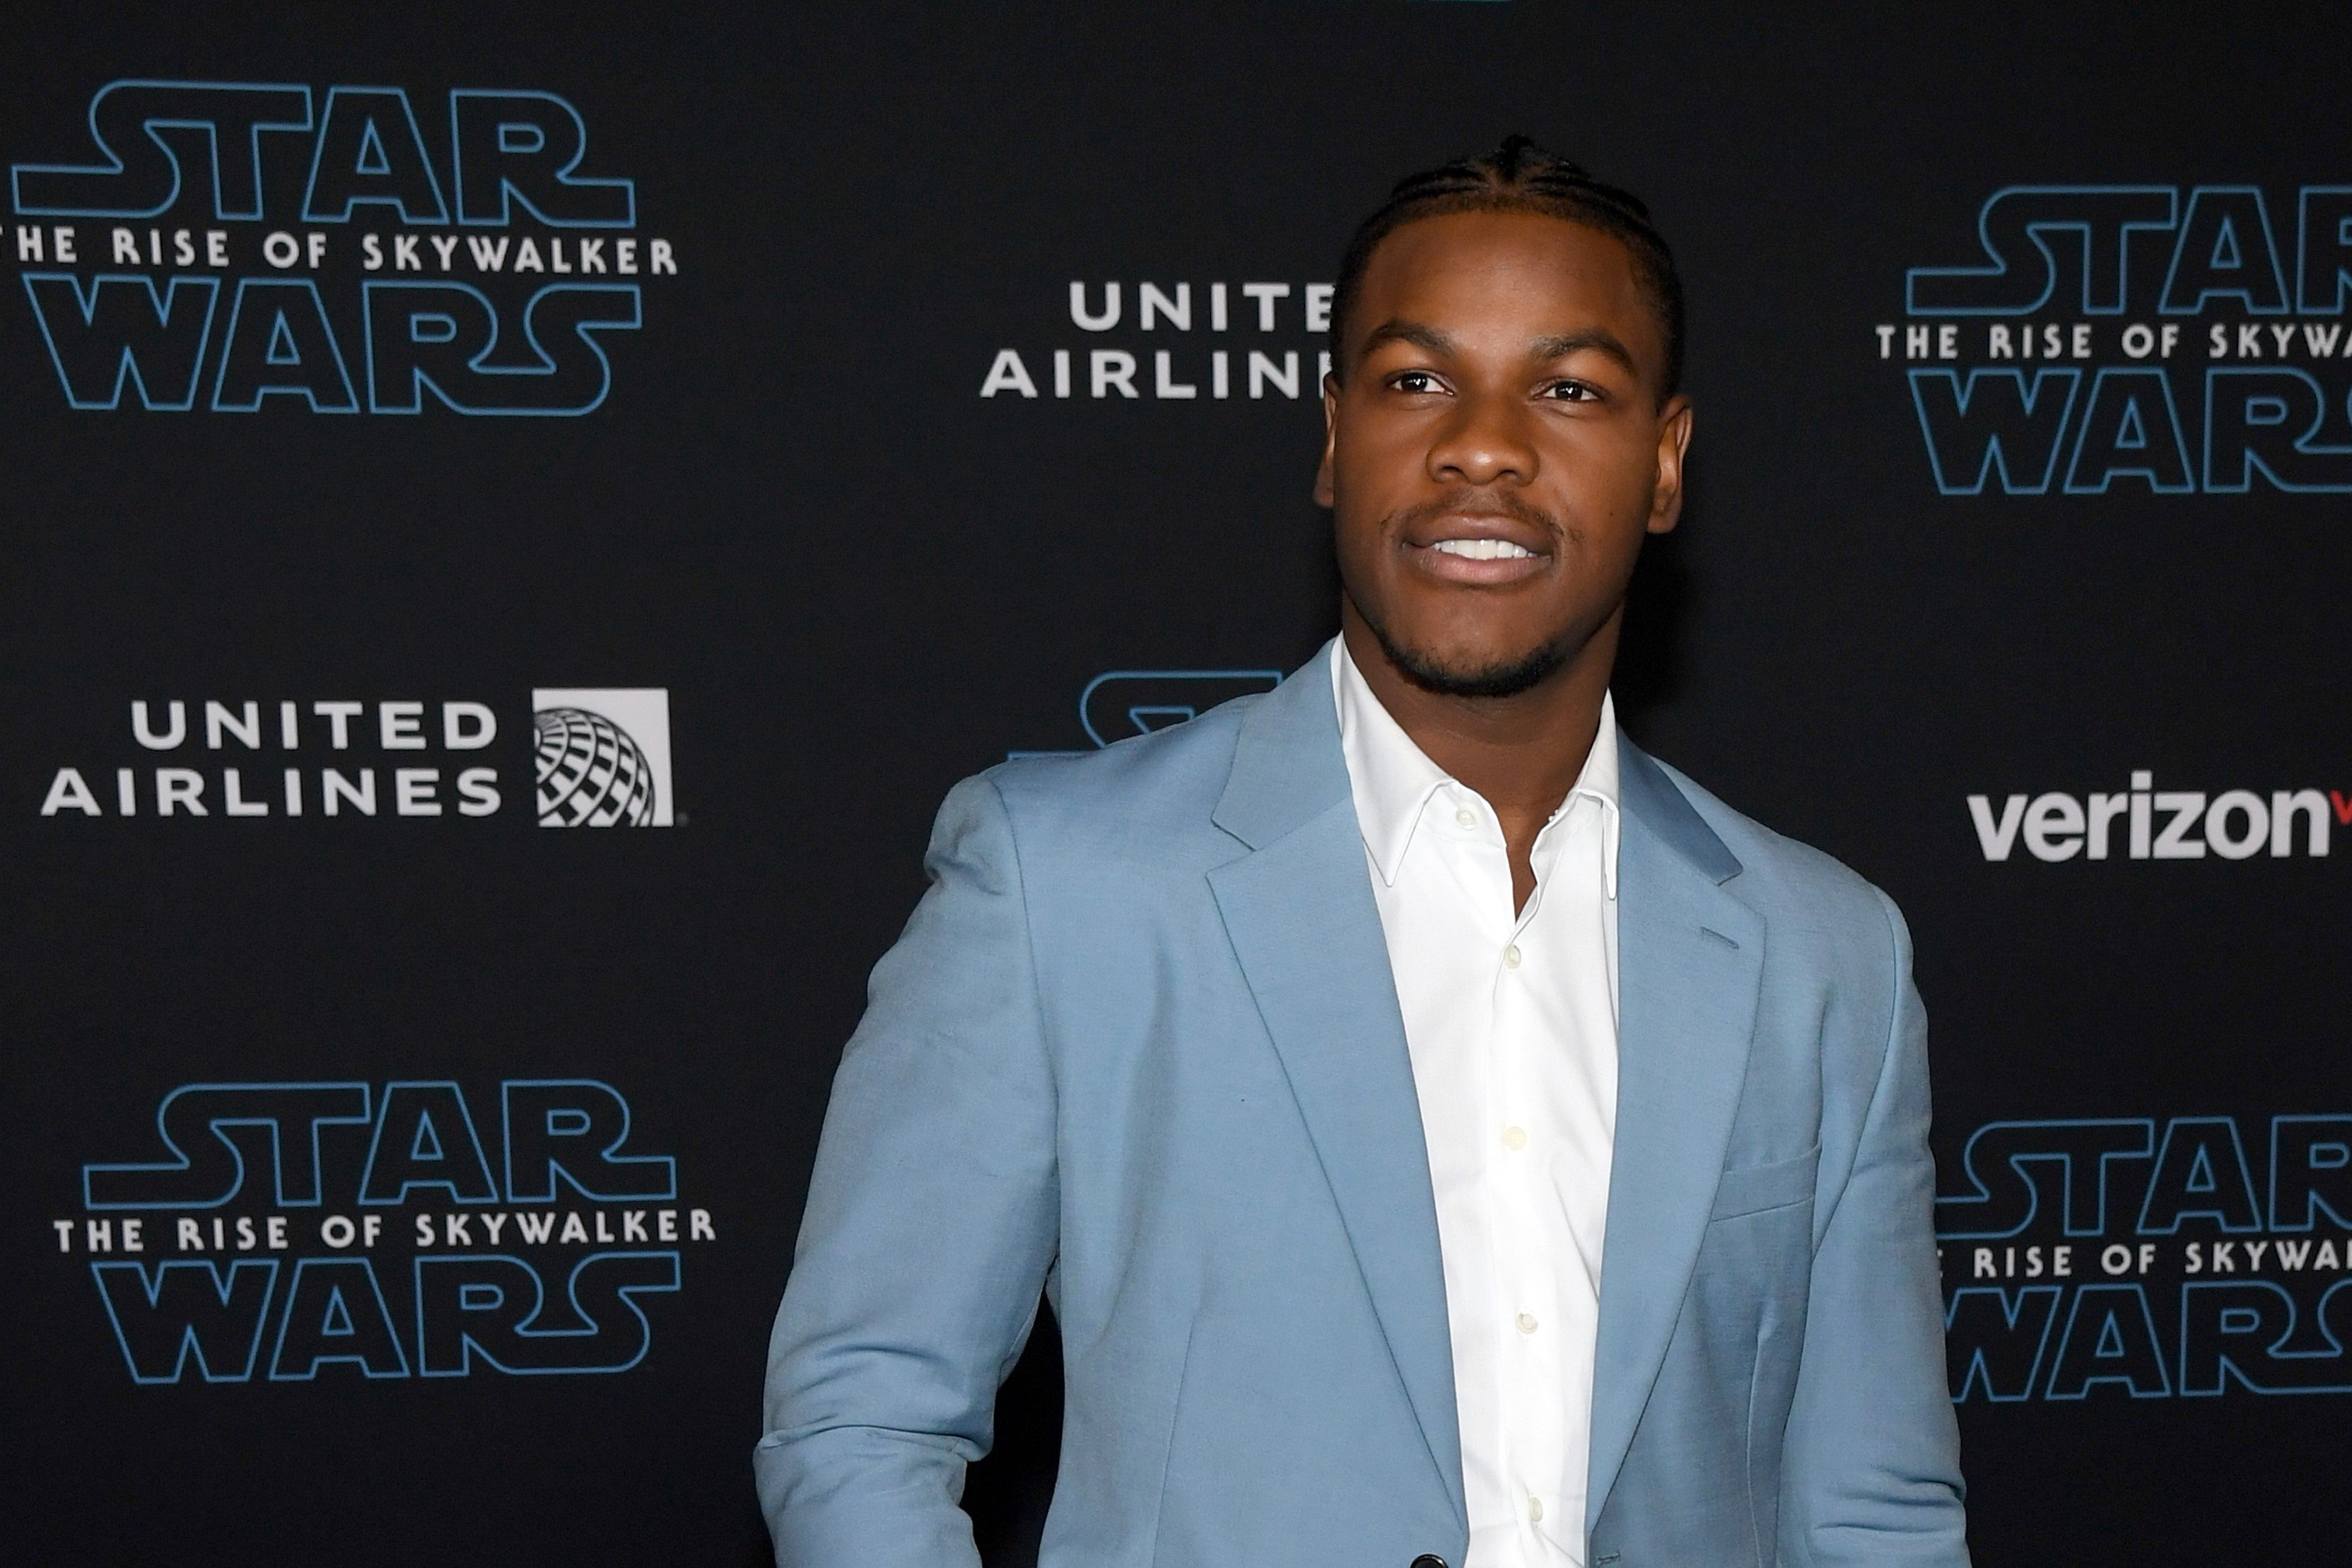 John Boyega, in a light blue suit jacket and white shirt, at the premiere of Disney's 'Star Wars: The Rise of Luke Skywalker' in 2019.